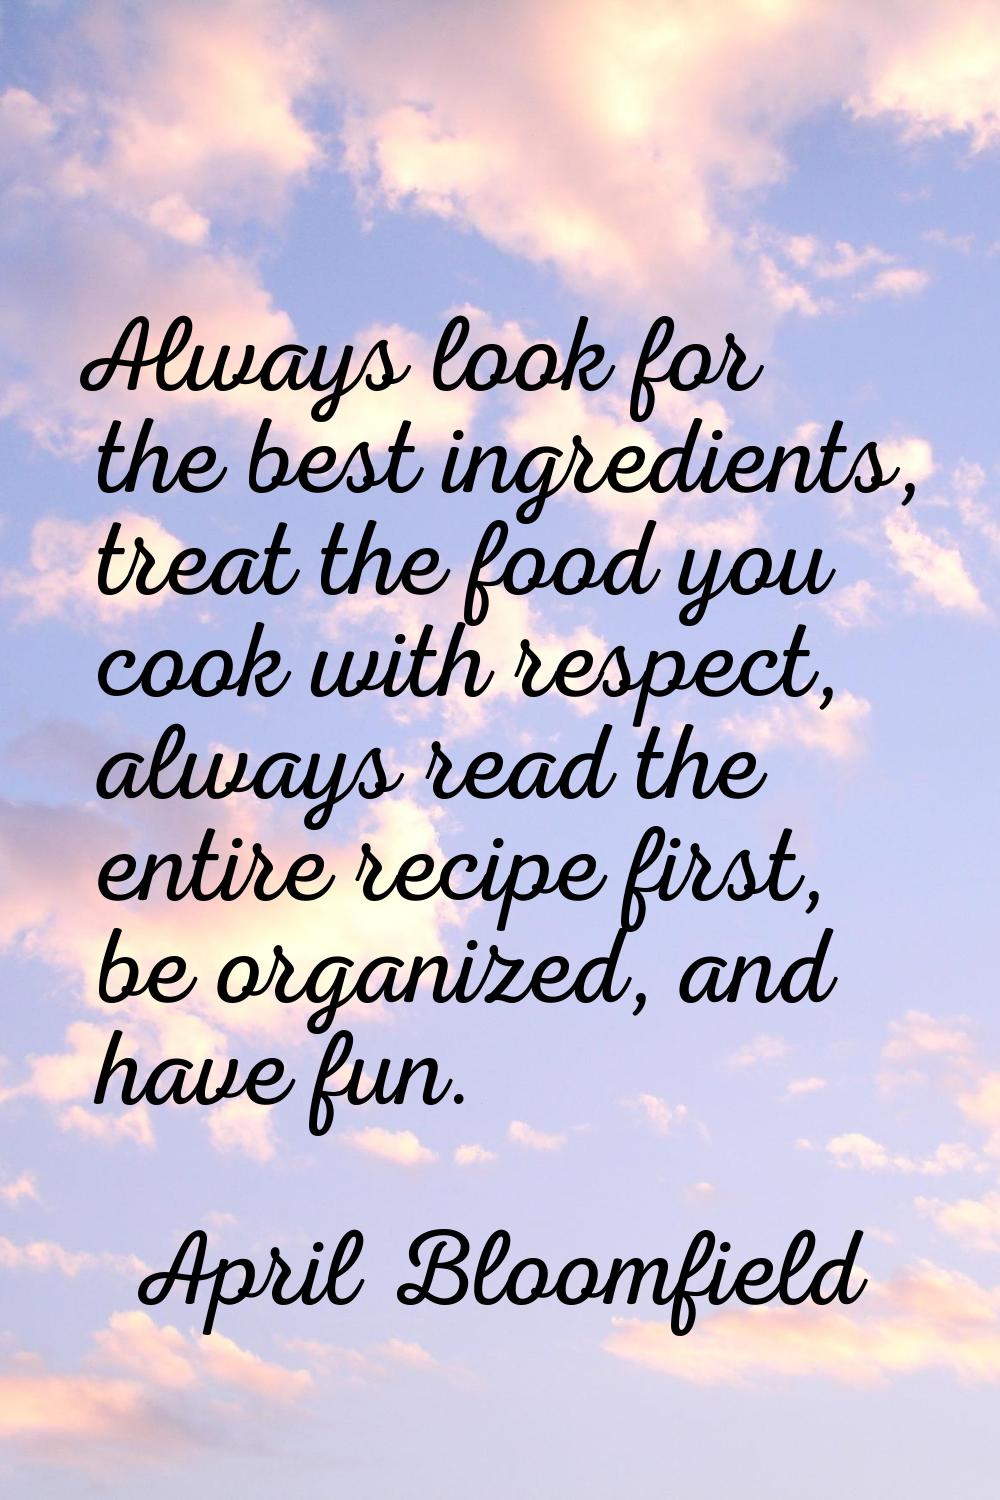 Always look for the best ingredients, treat the food you cook with respect, always read the entire 